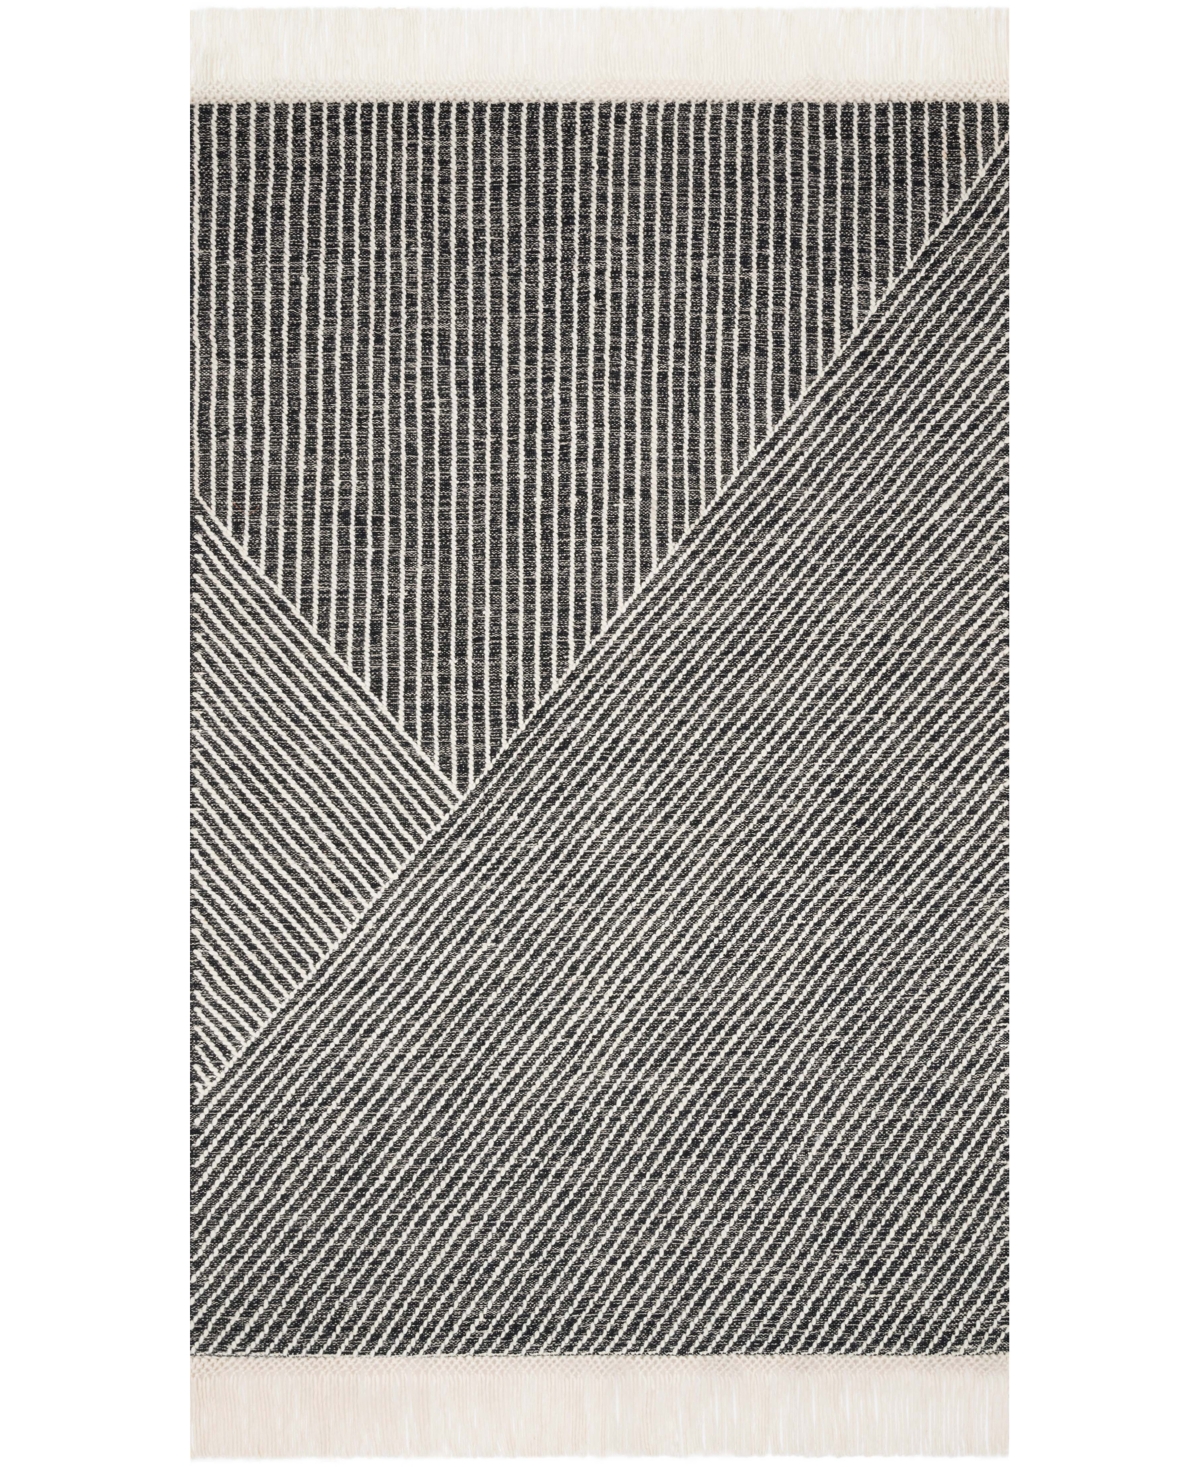 Magnolia Home By Joanna Gaines X Loloi Newton Net-01 2'3" X 3'9" Area Rug In Charcoal